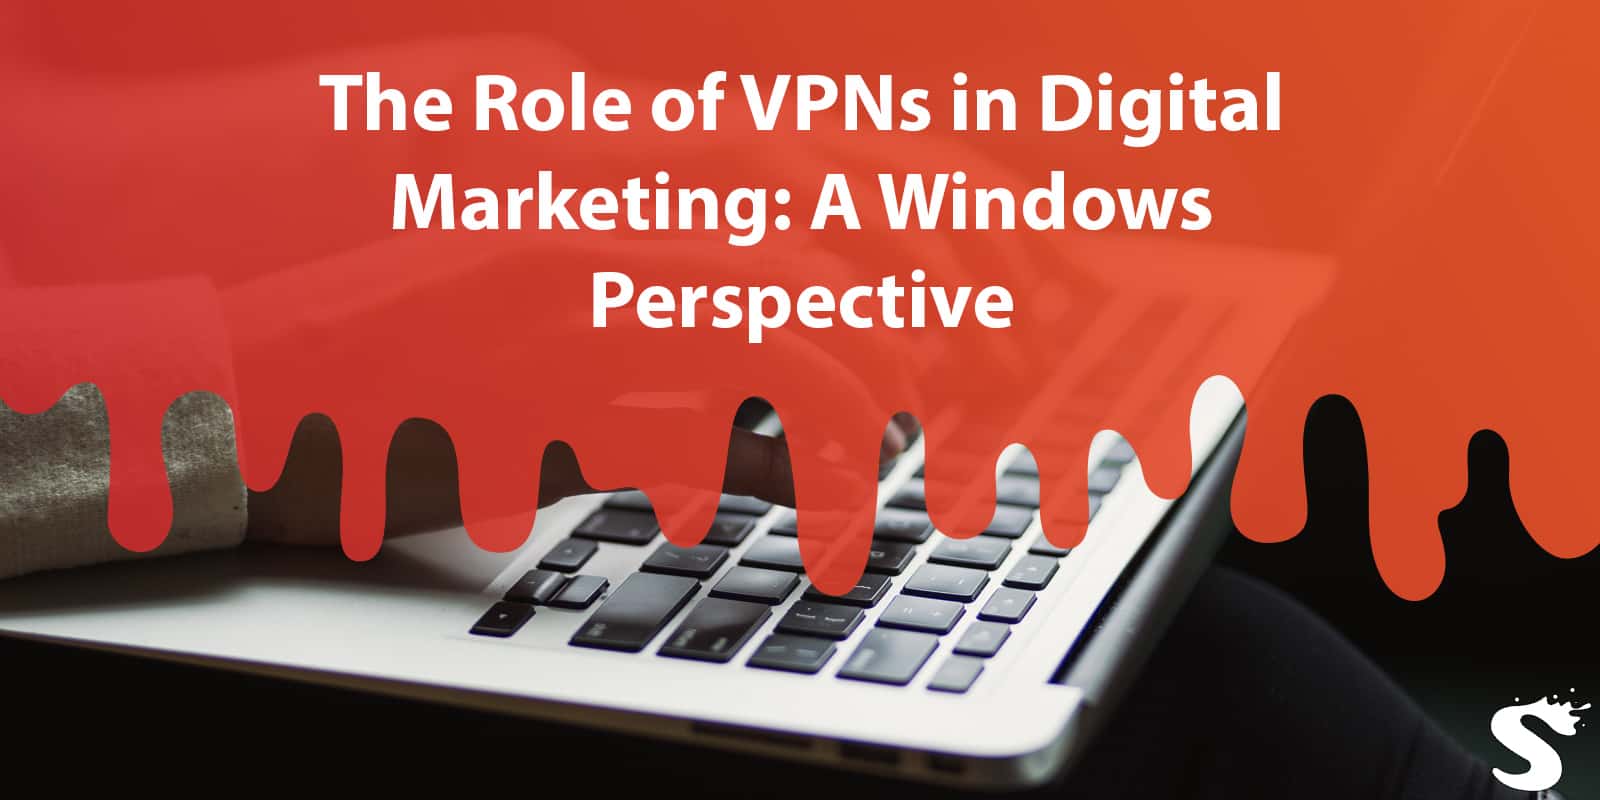 The Role of VPNs in Digital Marketing: A Windows Perspective